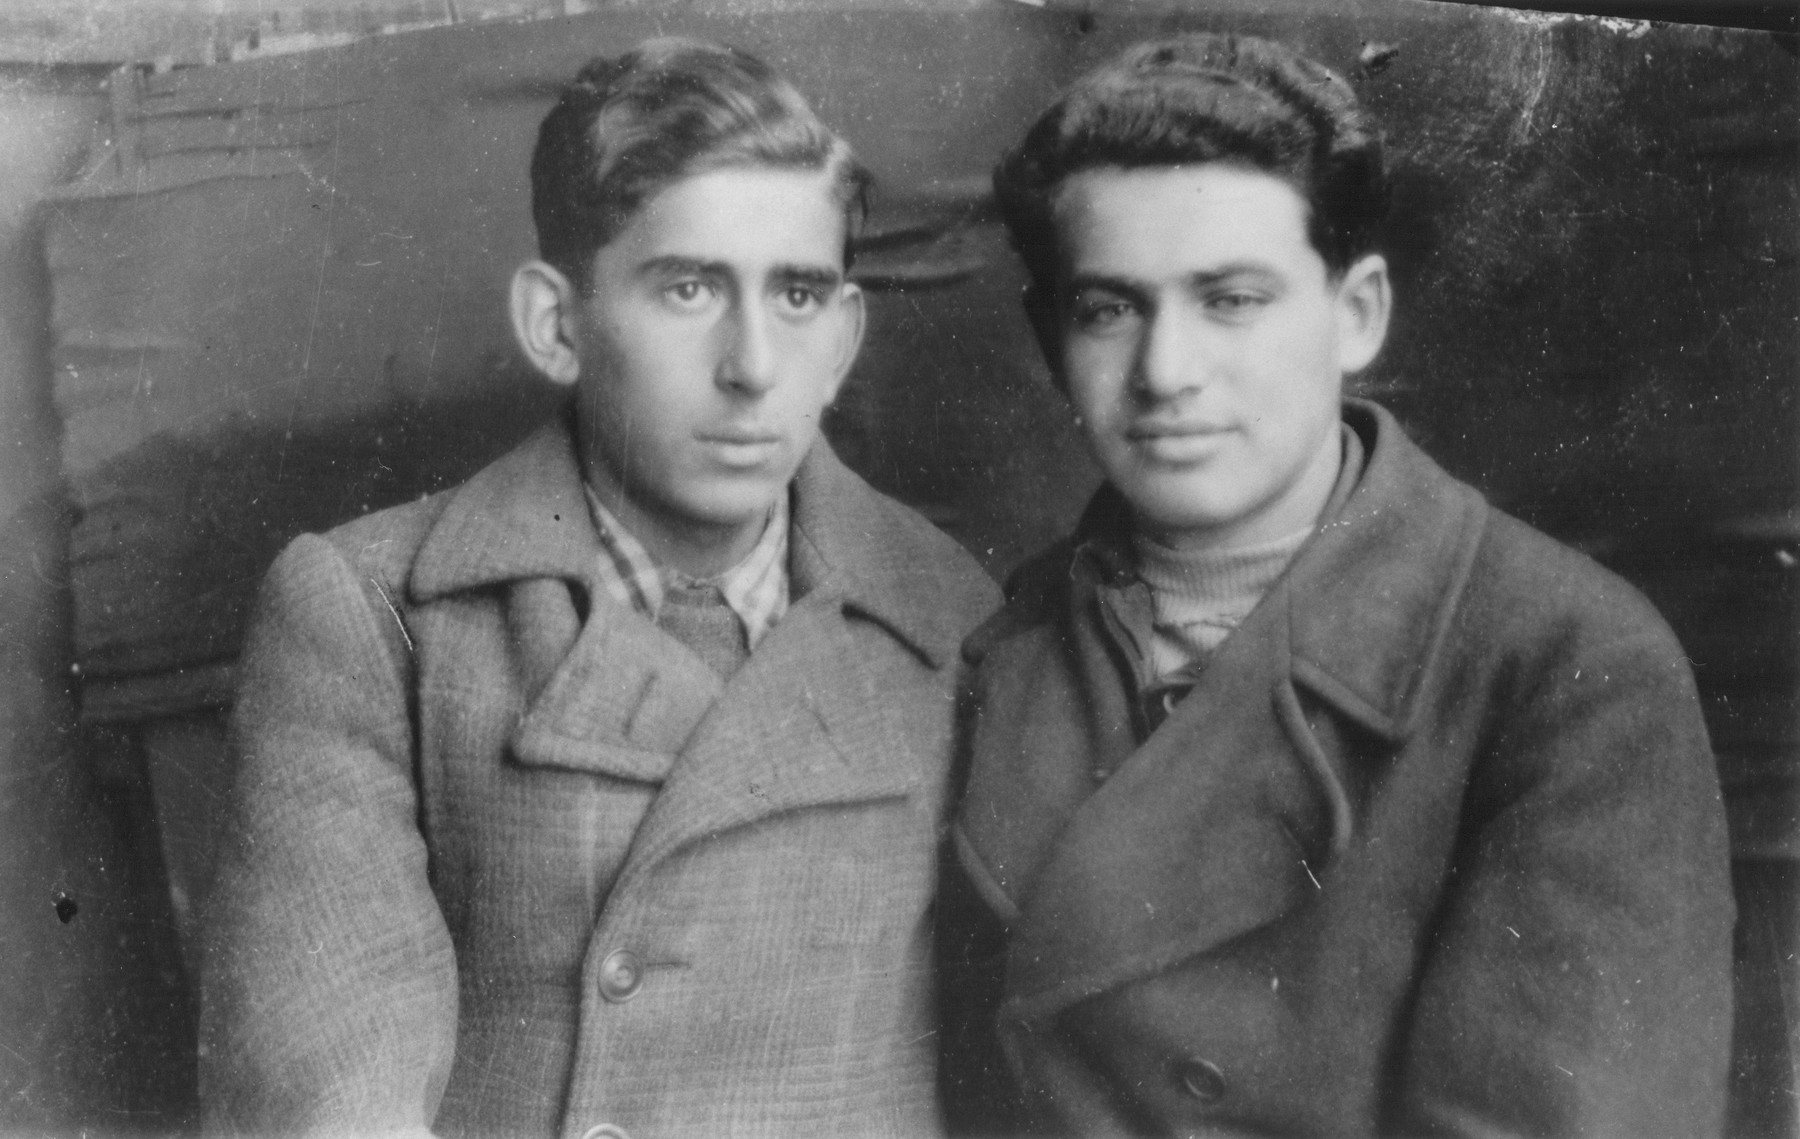 Aaron Yermus and his classmate Moshe Kristol.  The two attended a Russian, Polish school in Kzyl-Orda, Khazakstan during the war.  

The student body was 60% Jewish and 40% non-Jewish.  Its students were mostly Polish refugees seeking haven in the Soviet Union.